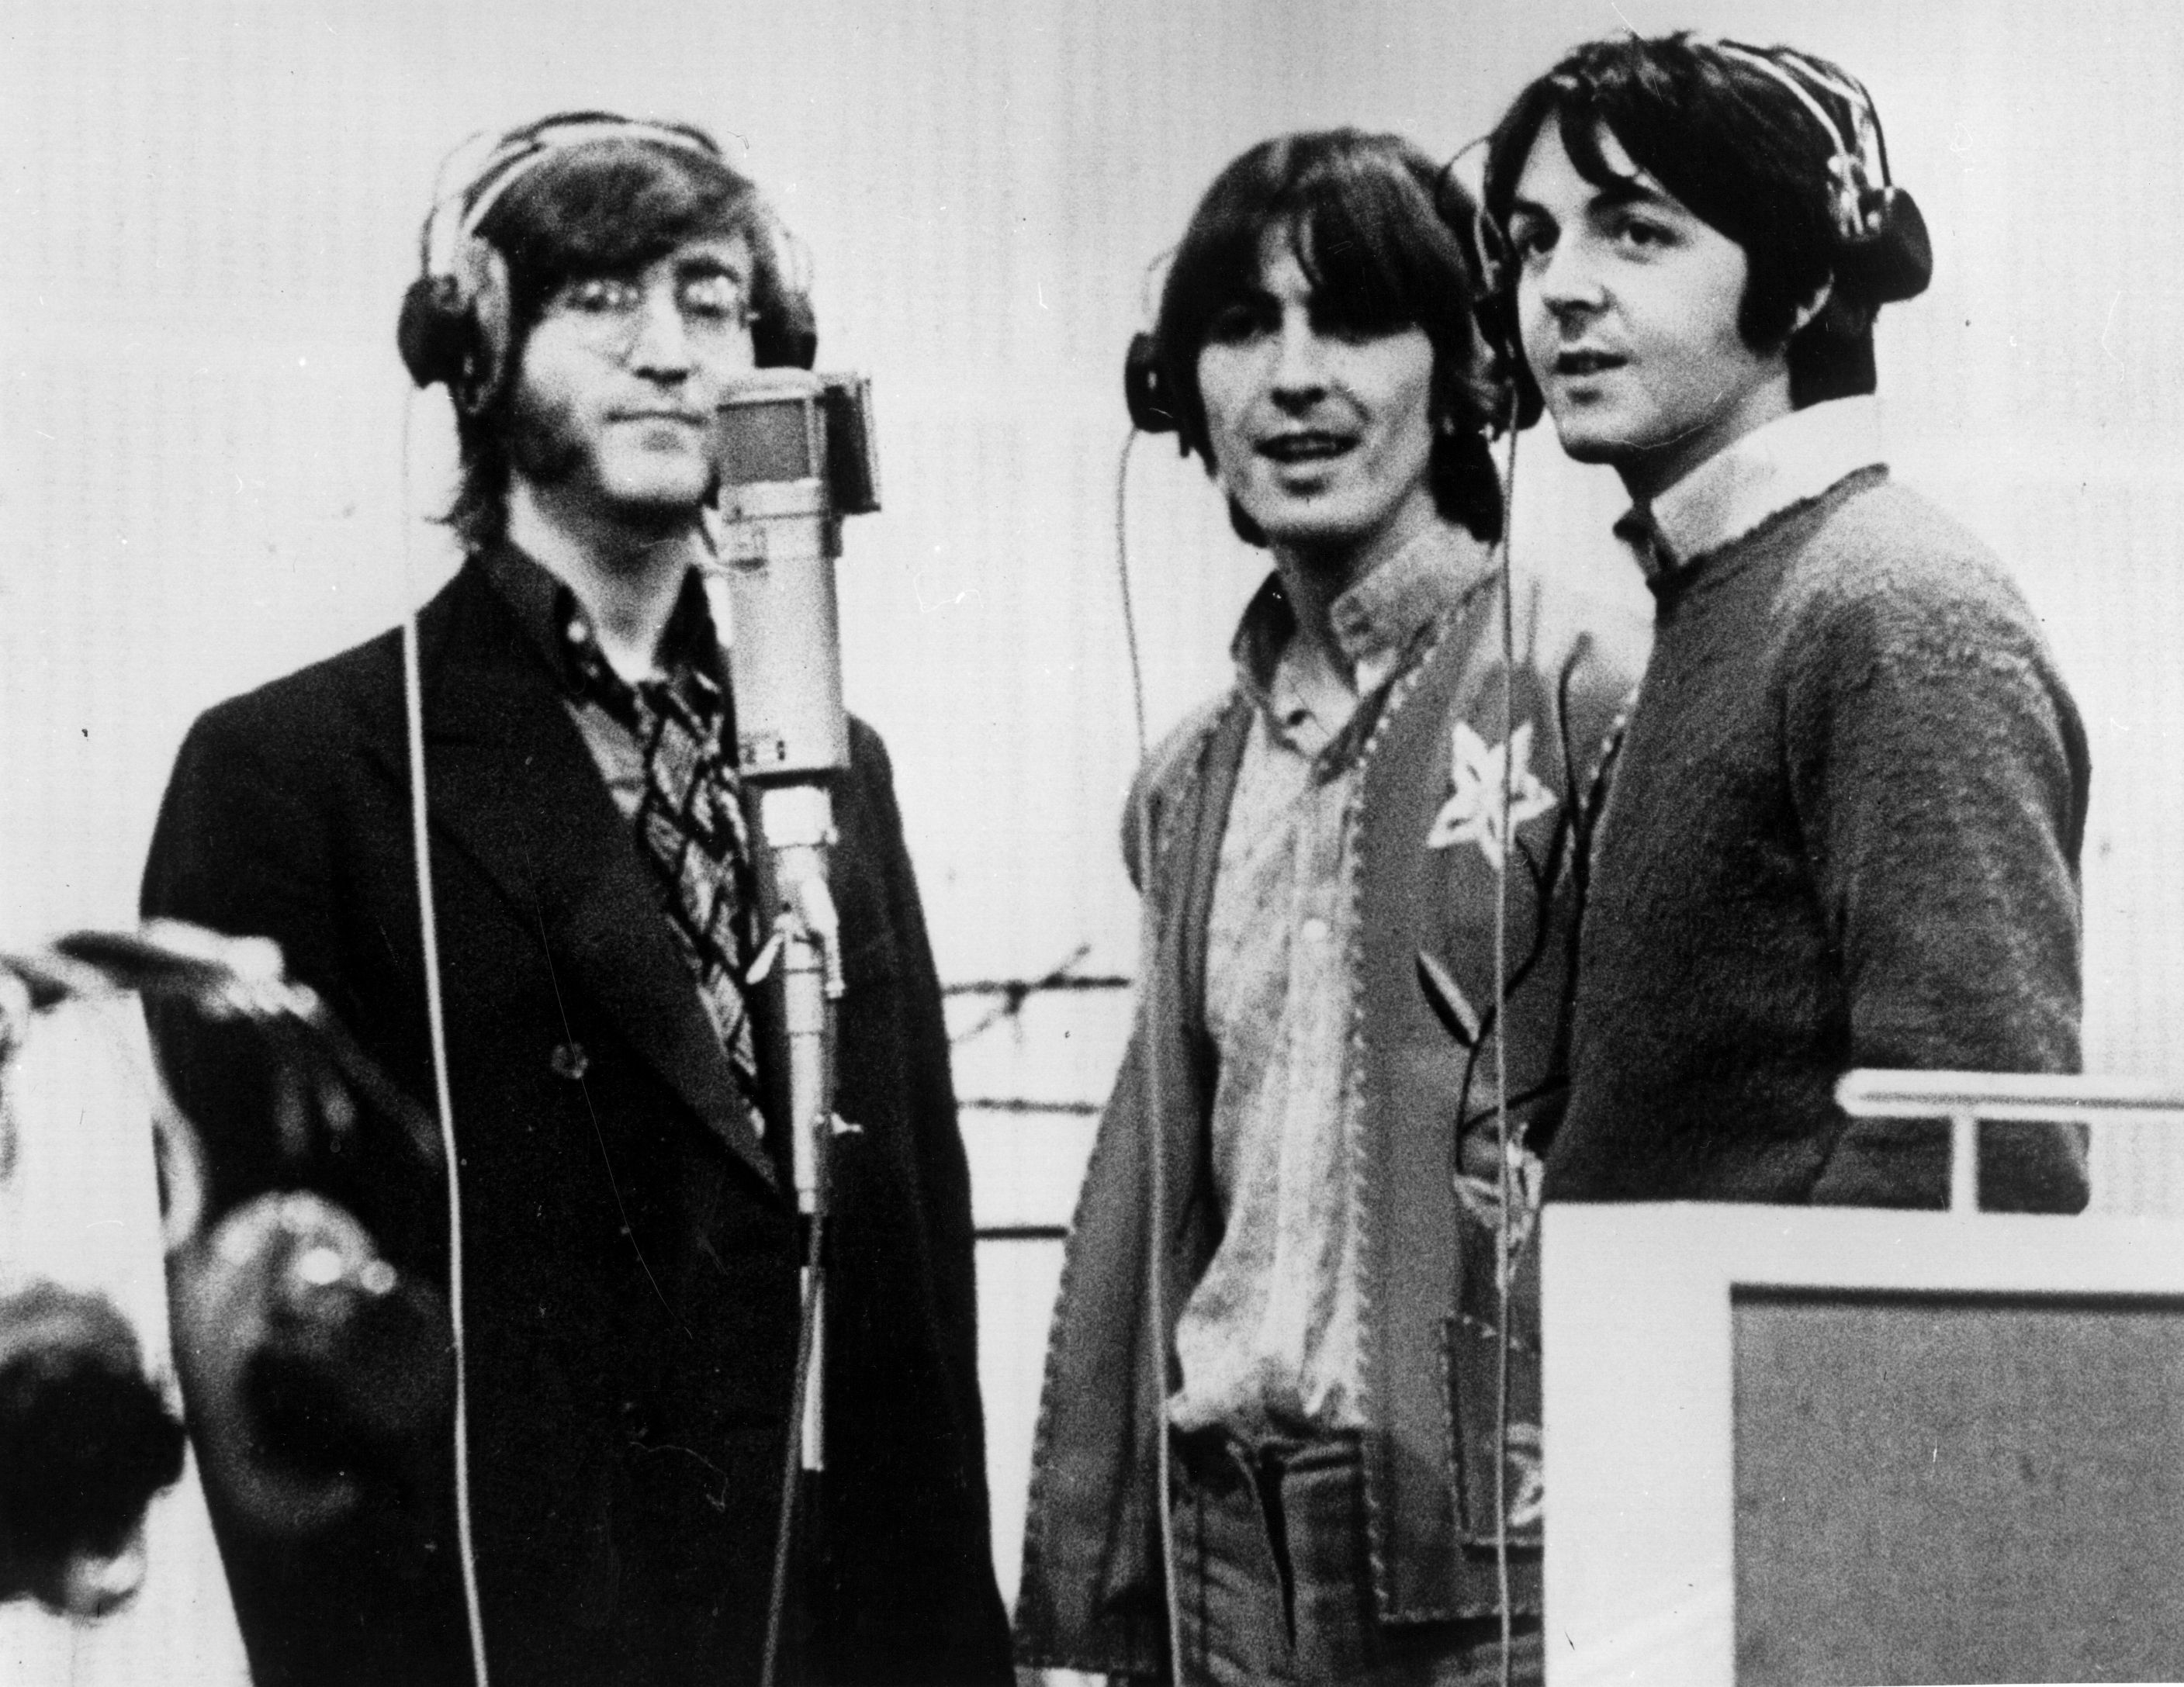 The Beatles' John Lennon, George Harrison, and Paul McCartney with a microphone